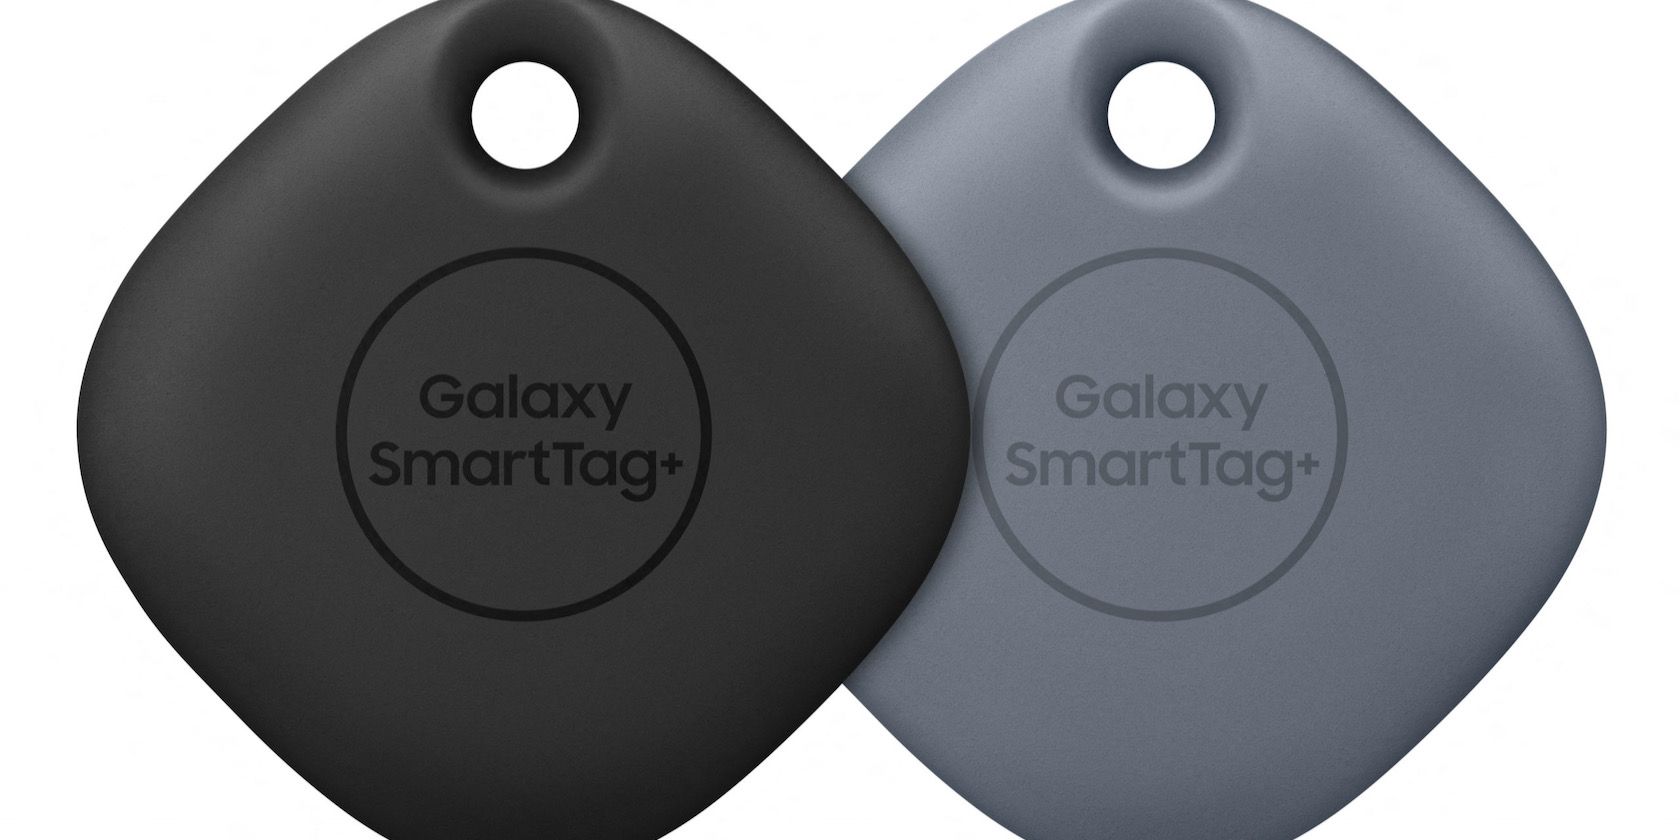 Samsung Officially Launches Its New SmartTag+ Trackers